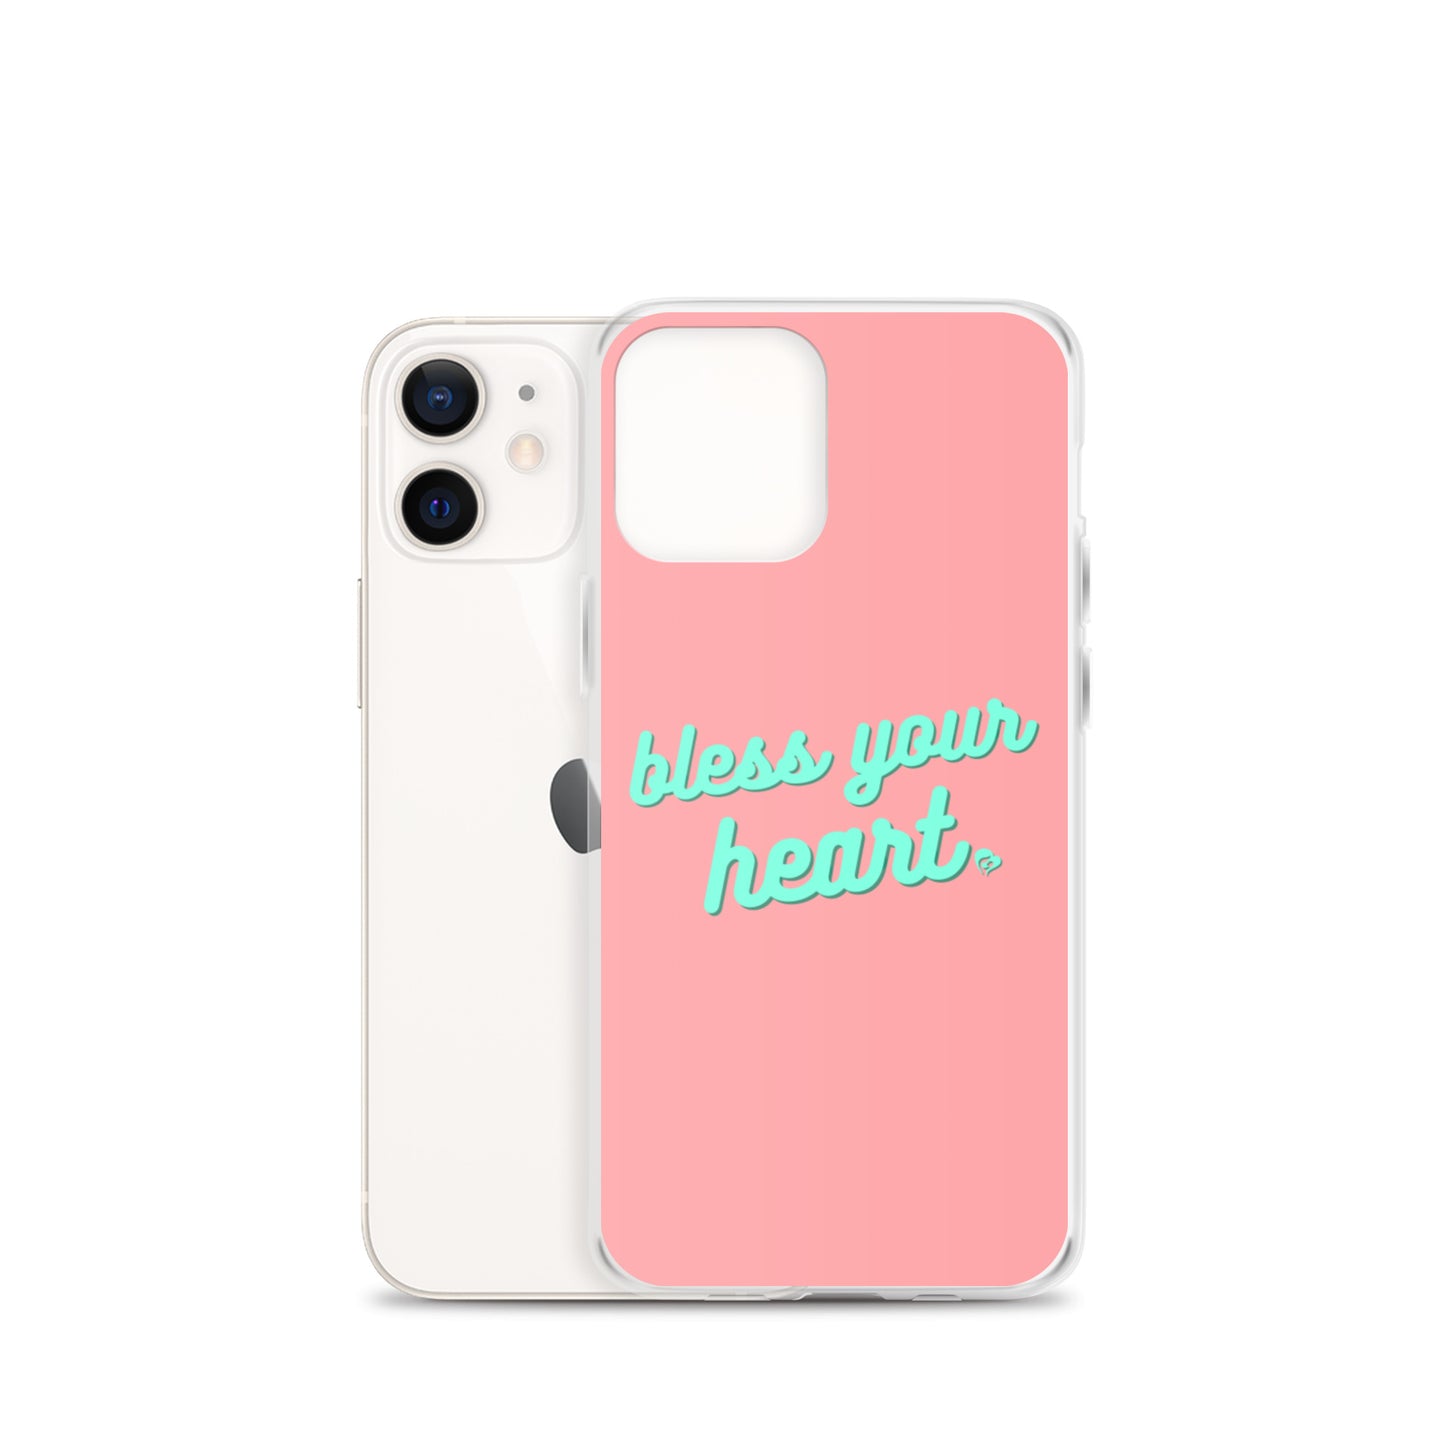 Bless Your Heart iPhone Case